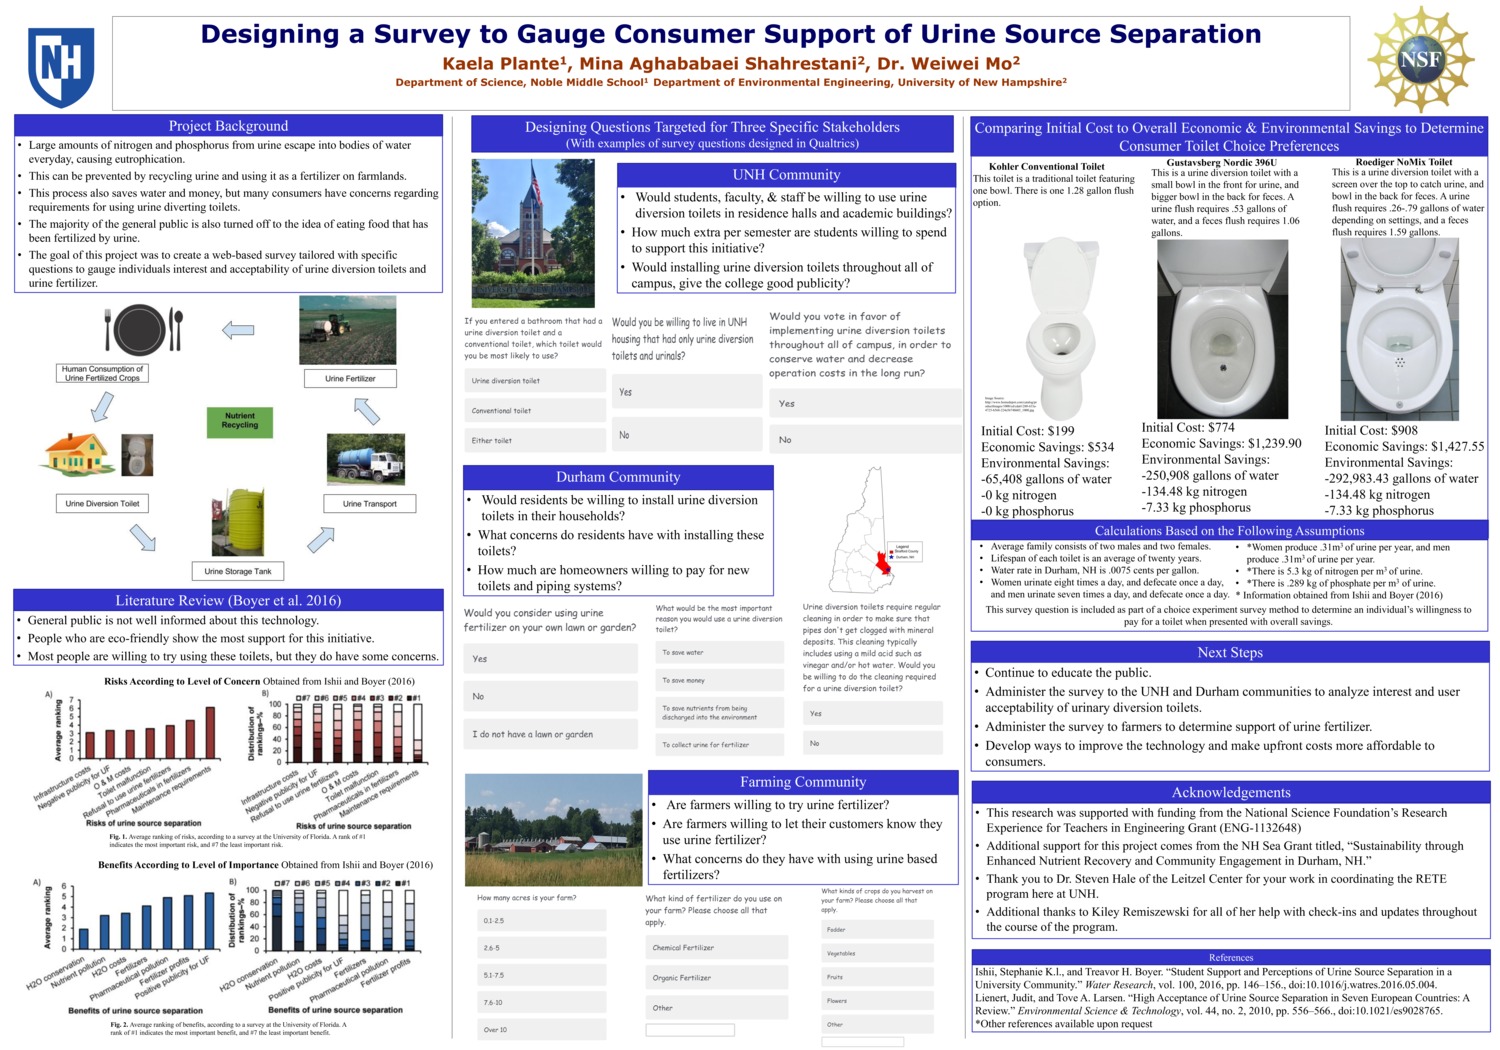 Designing A Survey To Gauge Consumer Support Of Urine Source Separation by kel89